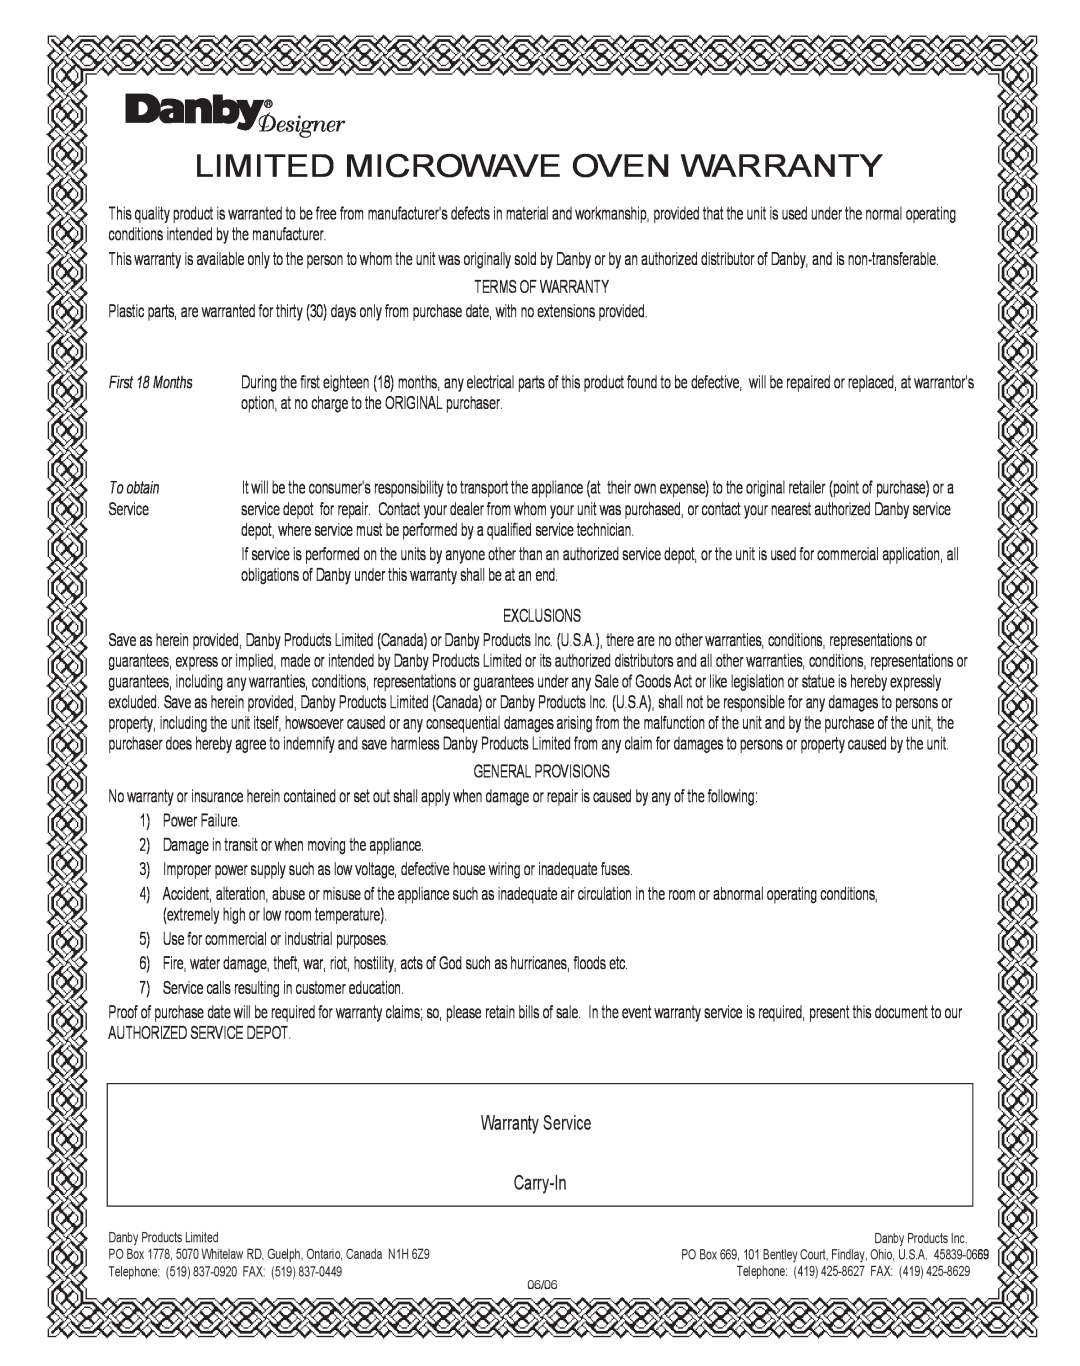 Danby DMW1147SS owner manual Limited Microwave Oven Warranty, Warranty Service, Carry-In, First 18 Months, To obtain 